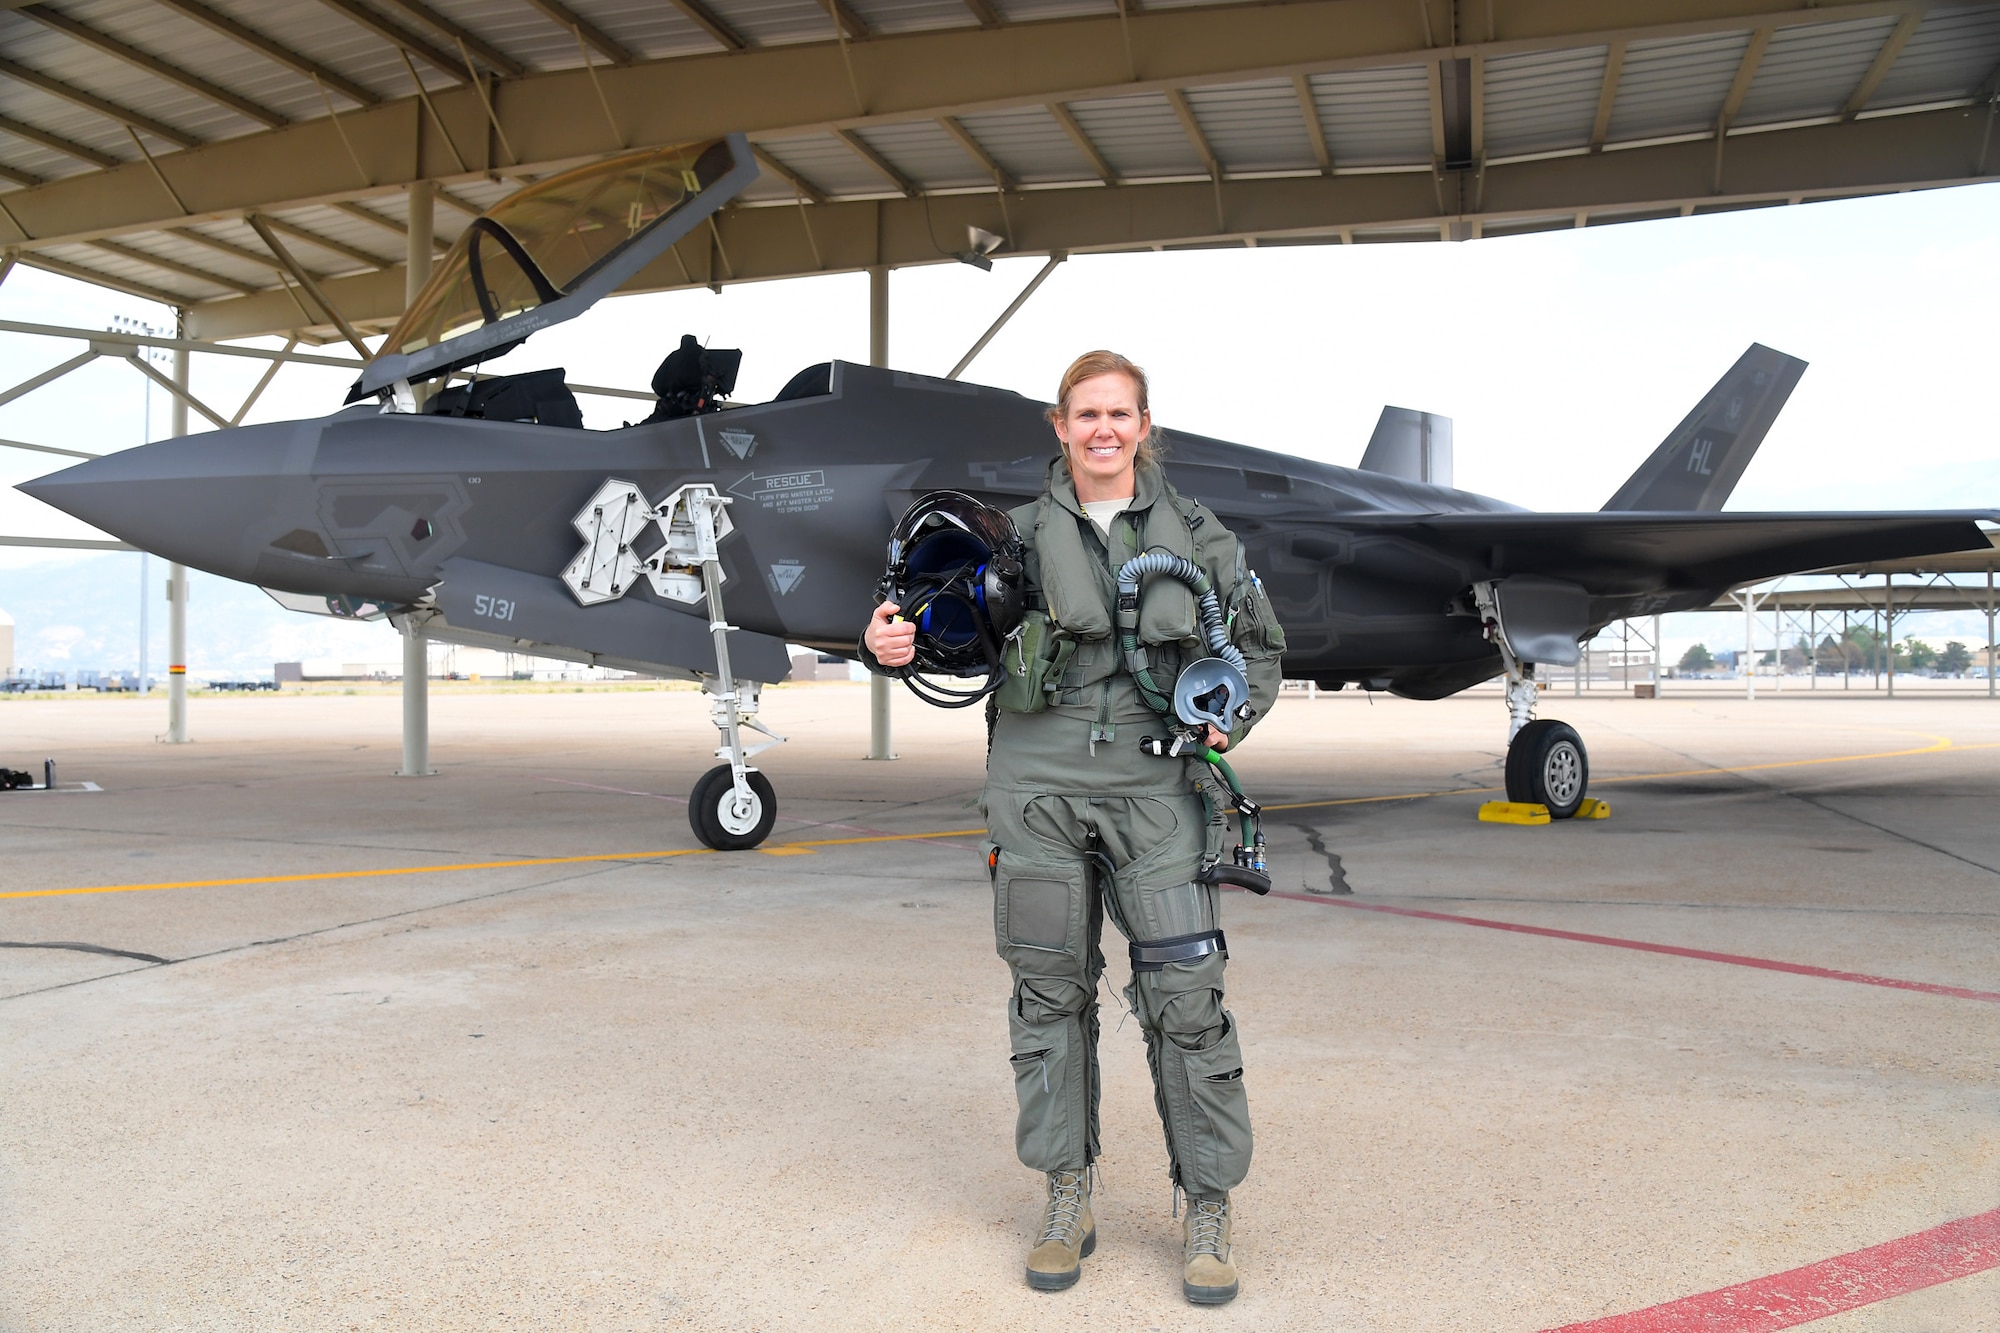 Col. Gina "Torch" Sabric, commander of the 419th Fighter Wing at Hill Air Force Base, Utah, and the Air Force Reserve's first female F-35 pilot